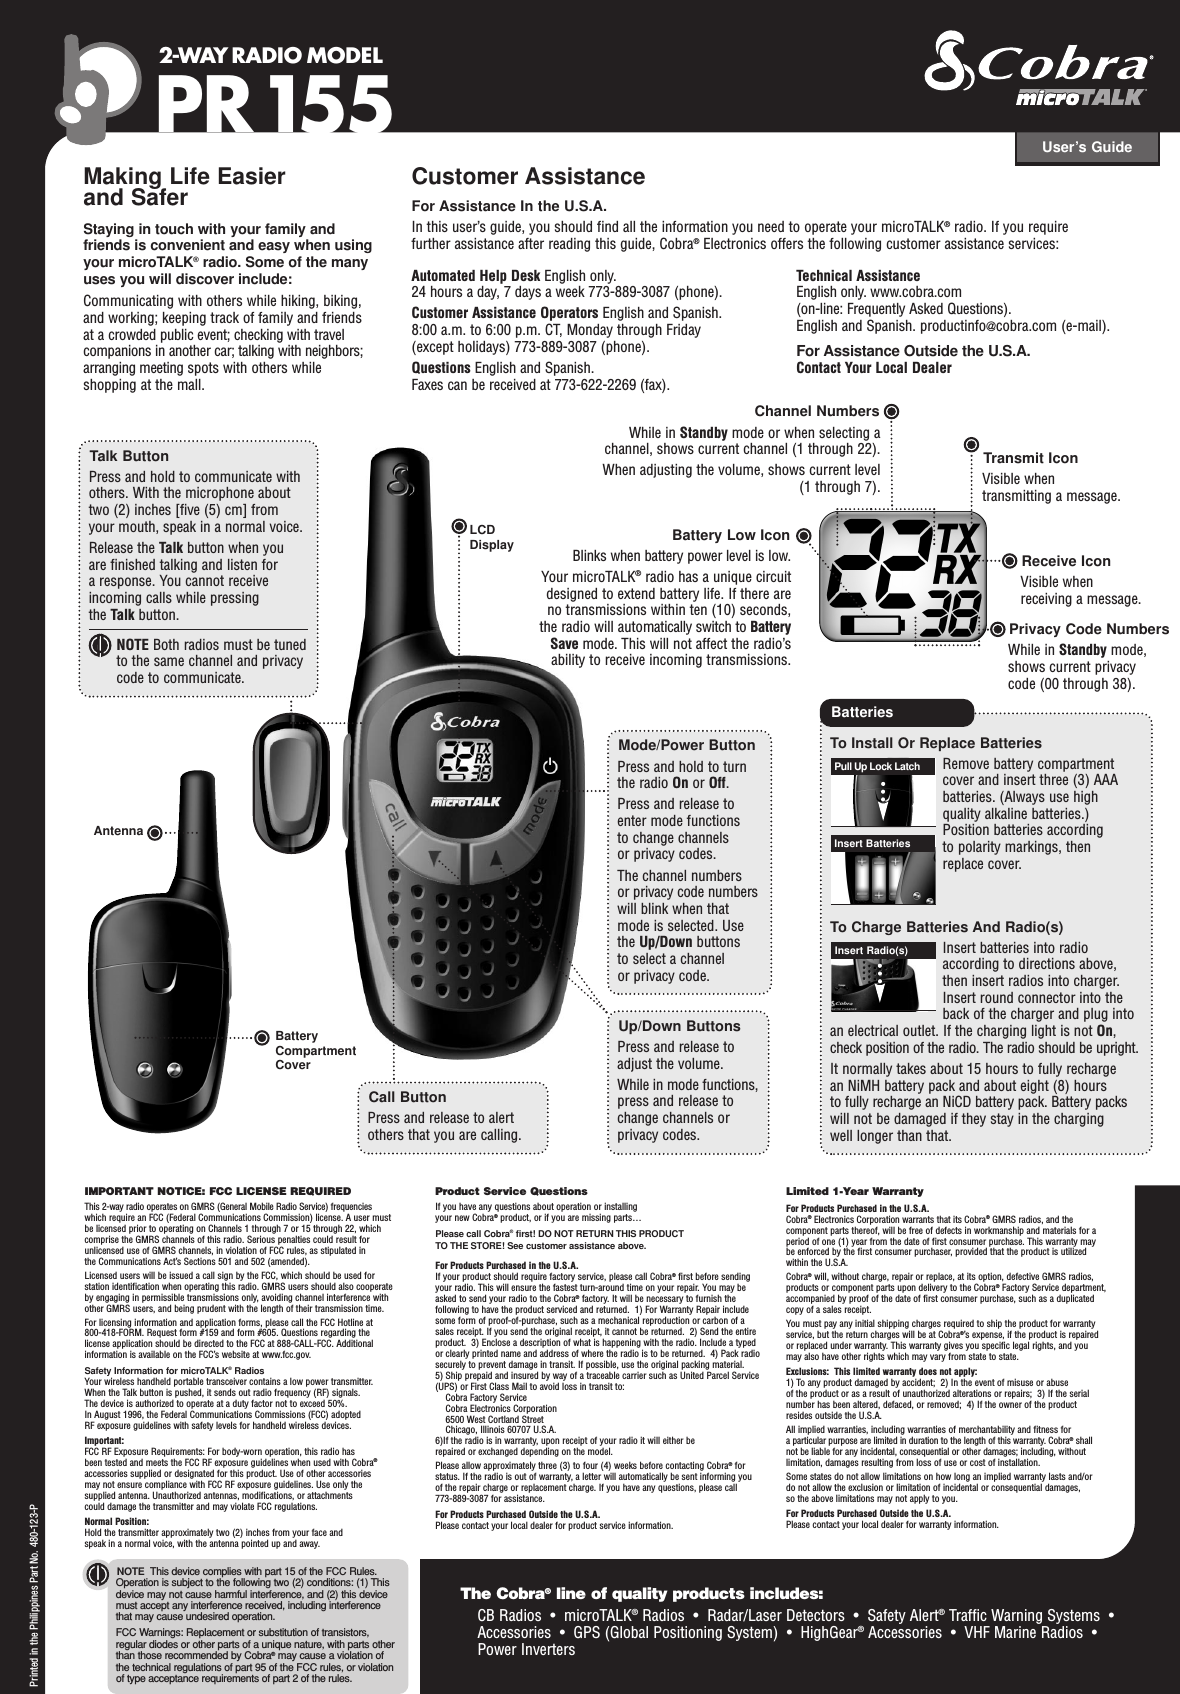 User’s Guide2-WAY RADIO MODEL PR155IMPORTANT NOTICE: FCC LICENSE REQUIREDThis 2-way radio operates on GMRS (General Mobile Radio Service) frequencieswhich require an FCC (Federal Communications Commission) license. A user must be licensed prior to operating on Channels 1 through 7 or 15 through 22, whichcomprise the GMRS channels of this radio. Serious penalties could result forunlicensed use of GMRS channels, in violation of FCC rules, as stipulated in the Communications Act’s Sections 501 and 502 (amended). Licensed users will be issued a call sign by the FCC, which should be used for station identification when operating this radio. GMRS users should also cooperate by engaging in permissible transmissions only, avoiding channel interference withother GMRS users, and being prudent with the length of their transmission time. For licensing information and application forms, please call the FCC Hotline at 800-418-FORM. Request form #159 and form #605. Questions regarding the license application should be directed to the FCC at 888-CALL-FCC. Additionalinformation is available on the FCC’s website at www.fcc.gov.Safety Information for microTALK®RadiosYour wireless handheld portable transceiver contains a low power transmitter. When the Talk button is pushed, it sends out radio frequency (RF) signals. The device is authorized to operate at a duty factor not to exceed 50%. In August 1996, the Federal Communications Commissions (FCC) adopted RF exposure guidelines with safety levels for handheld wireless devices. Important: FCC RF Exposure Requirements: For body-worn operation, this radio has been tested and meets the FCC RF exposure guidelines when used with Cobra®accessories supplied or designated for this product. Use of other accessories may not ensure compliance with FCC RF exposure guidelines. Use only the supplied antenna. Unauthorized antennas, modifications, or attachments could damage the transmitter and may violate FCC regulations. Normal Position: Hold the transmitter approximately two (2) inches from your face and speak in a normal voice, with the antenna pointed up and away.Product Service QuestionsIf you have any questions about operation or installing your new Cobra®product, or if you are missing parts… Please call Cobra®first! DO NOT RETURN THIS PRODUCTTO THE STORE! See customer assistance above.For Products Purchased in the U.S.A.If your product should require factory service, please call Cobra®first before sendingyour radio. This will ensure the fastest turn-around time on your repair. You may beasked to send your radio to the Cobra®factory. It will be necessary to furnish thefollowing to have the product serviced and returned.  1) For Warranty Repair includesome form of proof-of-purchase, such as a mechanical reproduction or carbon of asales receipt. If you send the original receipt, it cannot be returned.  2) Send the entireproduct.  3) Enclose a description of what is happening with the radio. Include a typedor clearly printed name and address of where the radio is to be returned.  4) Pack radiosecurely to prevent damage in transit. If possible, use the original packing material.  5) Ship prepaid and insured by way of a traceable carrier such as United Parcel Service(UPS) or First Class Mail to avoid loss in transit to:Cobra Factory ServiceCobra Electronics Corporation6500 West Cortland StreetChicago, Illinois 60707 U.S.A.  6)If the radio is in warranty, upon receipt of your radio it will either be repaired or exchanged depending on the model. Please allow approximately three (3) to four (4) weeks before contacting Cobra®forstatus. If the radio is out of warranty, a letter will automatically be sent informing youof the repair charge or replacement charge. If you have any questions, please call 773-889-3087 for assistance.For Products Purchased Outside the U.S.A.Please contact your local dealer for product service information.Limited 1-Year WarrantyFor Products Purchased in the U.S.A.Cobra®Electronics Corporation warrants that its Cobra®GMRS radios, and thecomponent parts thereof, will be free of defects in workmanship and materials for aperiod of one (1) year from the date of first consumer purchase. This warranty may be enforced by the first consumer purchaser, provided that the product is utilizedwithin the U.S.A. Cobra®will, without charge, repair or replace, at its option, defective GMRS radios,products or component parts upon delivery to the Cobra®Factory Service department,accompanied by proof of the date of first consumer purchase, such as a duplicatedcopy of a sales receipt. You must pay any initial shipping charges required to ship the product for warrantyservice, but the return charges will be at Cobra®’s expense, if the product is repaired or replaced under warranty. This warranty gives you specific legal rights, and you may also have other rights which may vary from state to state.Exclusions:  This limited warranty does not apply:  1) To any product damaged by accident;  2) In the event of misuse or abuse of the product or as a result of unauthorized alterations or repairs;  3) If the serialnumber has been altered, defaced, or removed;  4) If the owner of the product resides outside the U.S.A.All implied warranties, including warranties of merchantability and fitness for a particular purpose are limited in duration to the length of this warranty. Cobra®shall not be liable for any incidental, consequential or other damages; including,withoutlimitation, damages resulting from loss of use or cost of installation. Some states do not allow limitations on how long an implied warranty lasts and/or do not allow the exclusion or limitation of incidental or consequential damages, so the above limitations may not apply to you.For Products Purchased Outside the U.S.A.Please contact your local dealer for warranty information.NOTE This device complies with part 15 of the FCC Rules.Operation is subject to the following two (2) conditions: (1) Thisdevice may not cause harmful interference, and (2) this devicemust accept any interference received, including interference that may cause undesired operation.FCC Warnings: Replacement or substitution of transistors,regular diodes or other parts of a unique nature, with parts otherthan those recommended by Cobra®may cause a violation ofthe technical regulations of part 95 of the FCC rules, or violationof type acceptance requirements of part 2 of the rules.Making Life Easier and SaferStaying in touch with your family and friends is convenient and easy when usingyour microTALK®radio. Some of the many uses you will discover include:Communicating with others while hiking, biking, and working; keeping track of family and friends at a crowded public event; checking with travelcompanions in another car; talking with neighbors;arranging meeting spots with others while shopping at the mall.Customer AssistanceFor Assistance In the U.S.A. In this user’s guide, you should find all the information you need to operate your microTALK®radio. If you require further assistance after reading this guide, Cobra®Electronics offers the following customer assistance services:Automated Help Desk English only. 24 hours a day, 7 days a week 773-889-3087 (phone). Customer Assistance Operators English and Spanish. 8:00 a.m. to 6:00 p.m. CT, Monday through Friday (except holidays) 773-889-3087 (phone). Questions English and Spanish. Faxes can be received at 773-622-2269 (fax). Technical AssistanceEnglish only. www.cobra.com (on-line: Frequently Asked Questions). English and Spanish. productinfo@cobra.com (e-mail).For Assistance Outside the U.S.A. Contact Your Local DealerLCDDisplayCall ButtonPress and release to alertothers that you are calling.Mode/Power ButtonPress and hold to turnthe radio On or Off.Press and release toenter mode functions to change channels or privacy codes.The channel numbers or privacy code numberswill blink when thatmode is selected. Usethe Up/Down buttons to select a channel or privacy code.Up/Down ButtonsPress and release toadjust the volume.While in mode functions,press and release tochange channels orprivacy codes.Channel NumbersWhile in Standby mode or when selecting achannel, shows current channel (1 through 22).When adjusting the volume, shows current level(1 through 7).Privacy Code NumbersWhile in Standby mode,shows current privacy code (00 through 38).Receive IconVisible when receiving a message.Transmit IconVisible when transmitting a message.Battery Low IconBlinks when battery power level is low.Your microTALK®radio has a unique circuitdesigned to extend battery life. If there areno transmissions within ten (10) seconds,the radio will automatically switch to BatterySave mode. This will not affect the radio’sability to receive incoming transmissions.The Cobra®line of quality products includes:CB Radios  •  microTALK®Radios  •  Radar/Laser Detectors  •  Safety Alert®Traffic Warning Systems  •Accessories  •  GPS (Global Positioning System)  •  HighGear®Accessories  •  VHF Marine Radios  •  Power InvertersPrinted in the Philippines Part No. 480-123-PBatteryCompartmentCoverTo Install Or Replace BatteriesRemove battery compartmentcover and insert three (3) AAA batteries. (Always use high quality alkaline batteries.) Position batteries according to polarity markings, then replace cover.To Charge Batteries And Radio(s)Insert batteries into radio according to directions above,then insert radios into charger. Insert round connector into the back of the charger and plug intoan electrical outlet. If the charging light is not On,check position of the radio. The radio should be upright.It normally takes about 15 hours to fully recharge an NiMH battery pack and about eight (8) hours to fully recharge an NiCD battery pack. Battery packswill not be damaged if they stay in the charging well longer than that.BatteriesTalk ButtonPress and hold to communicate withothers. With the microphone abouttwo (2) inches [five (5) cm] from your mouth, speak in a normal voice. Release the Talk button when you are finished talking and listen for a response. You cannot receiveincoming calls while pressing the Talk button.NOTE Both radios must be tunedto the same channel and privacycode to communicate.Insert Radio(s)Pull Up Lock LatchInsert BatteriesAntenna